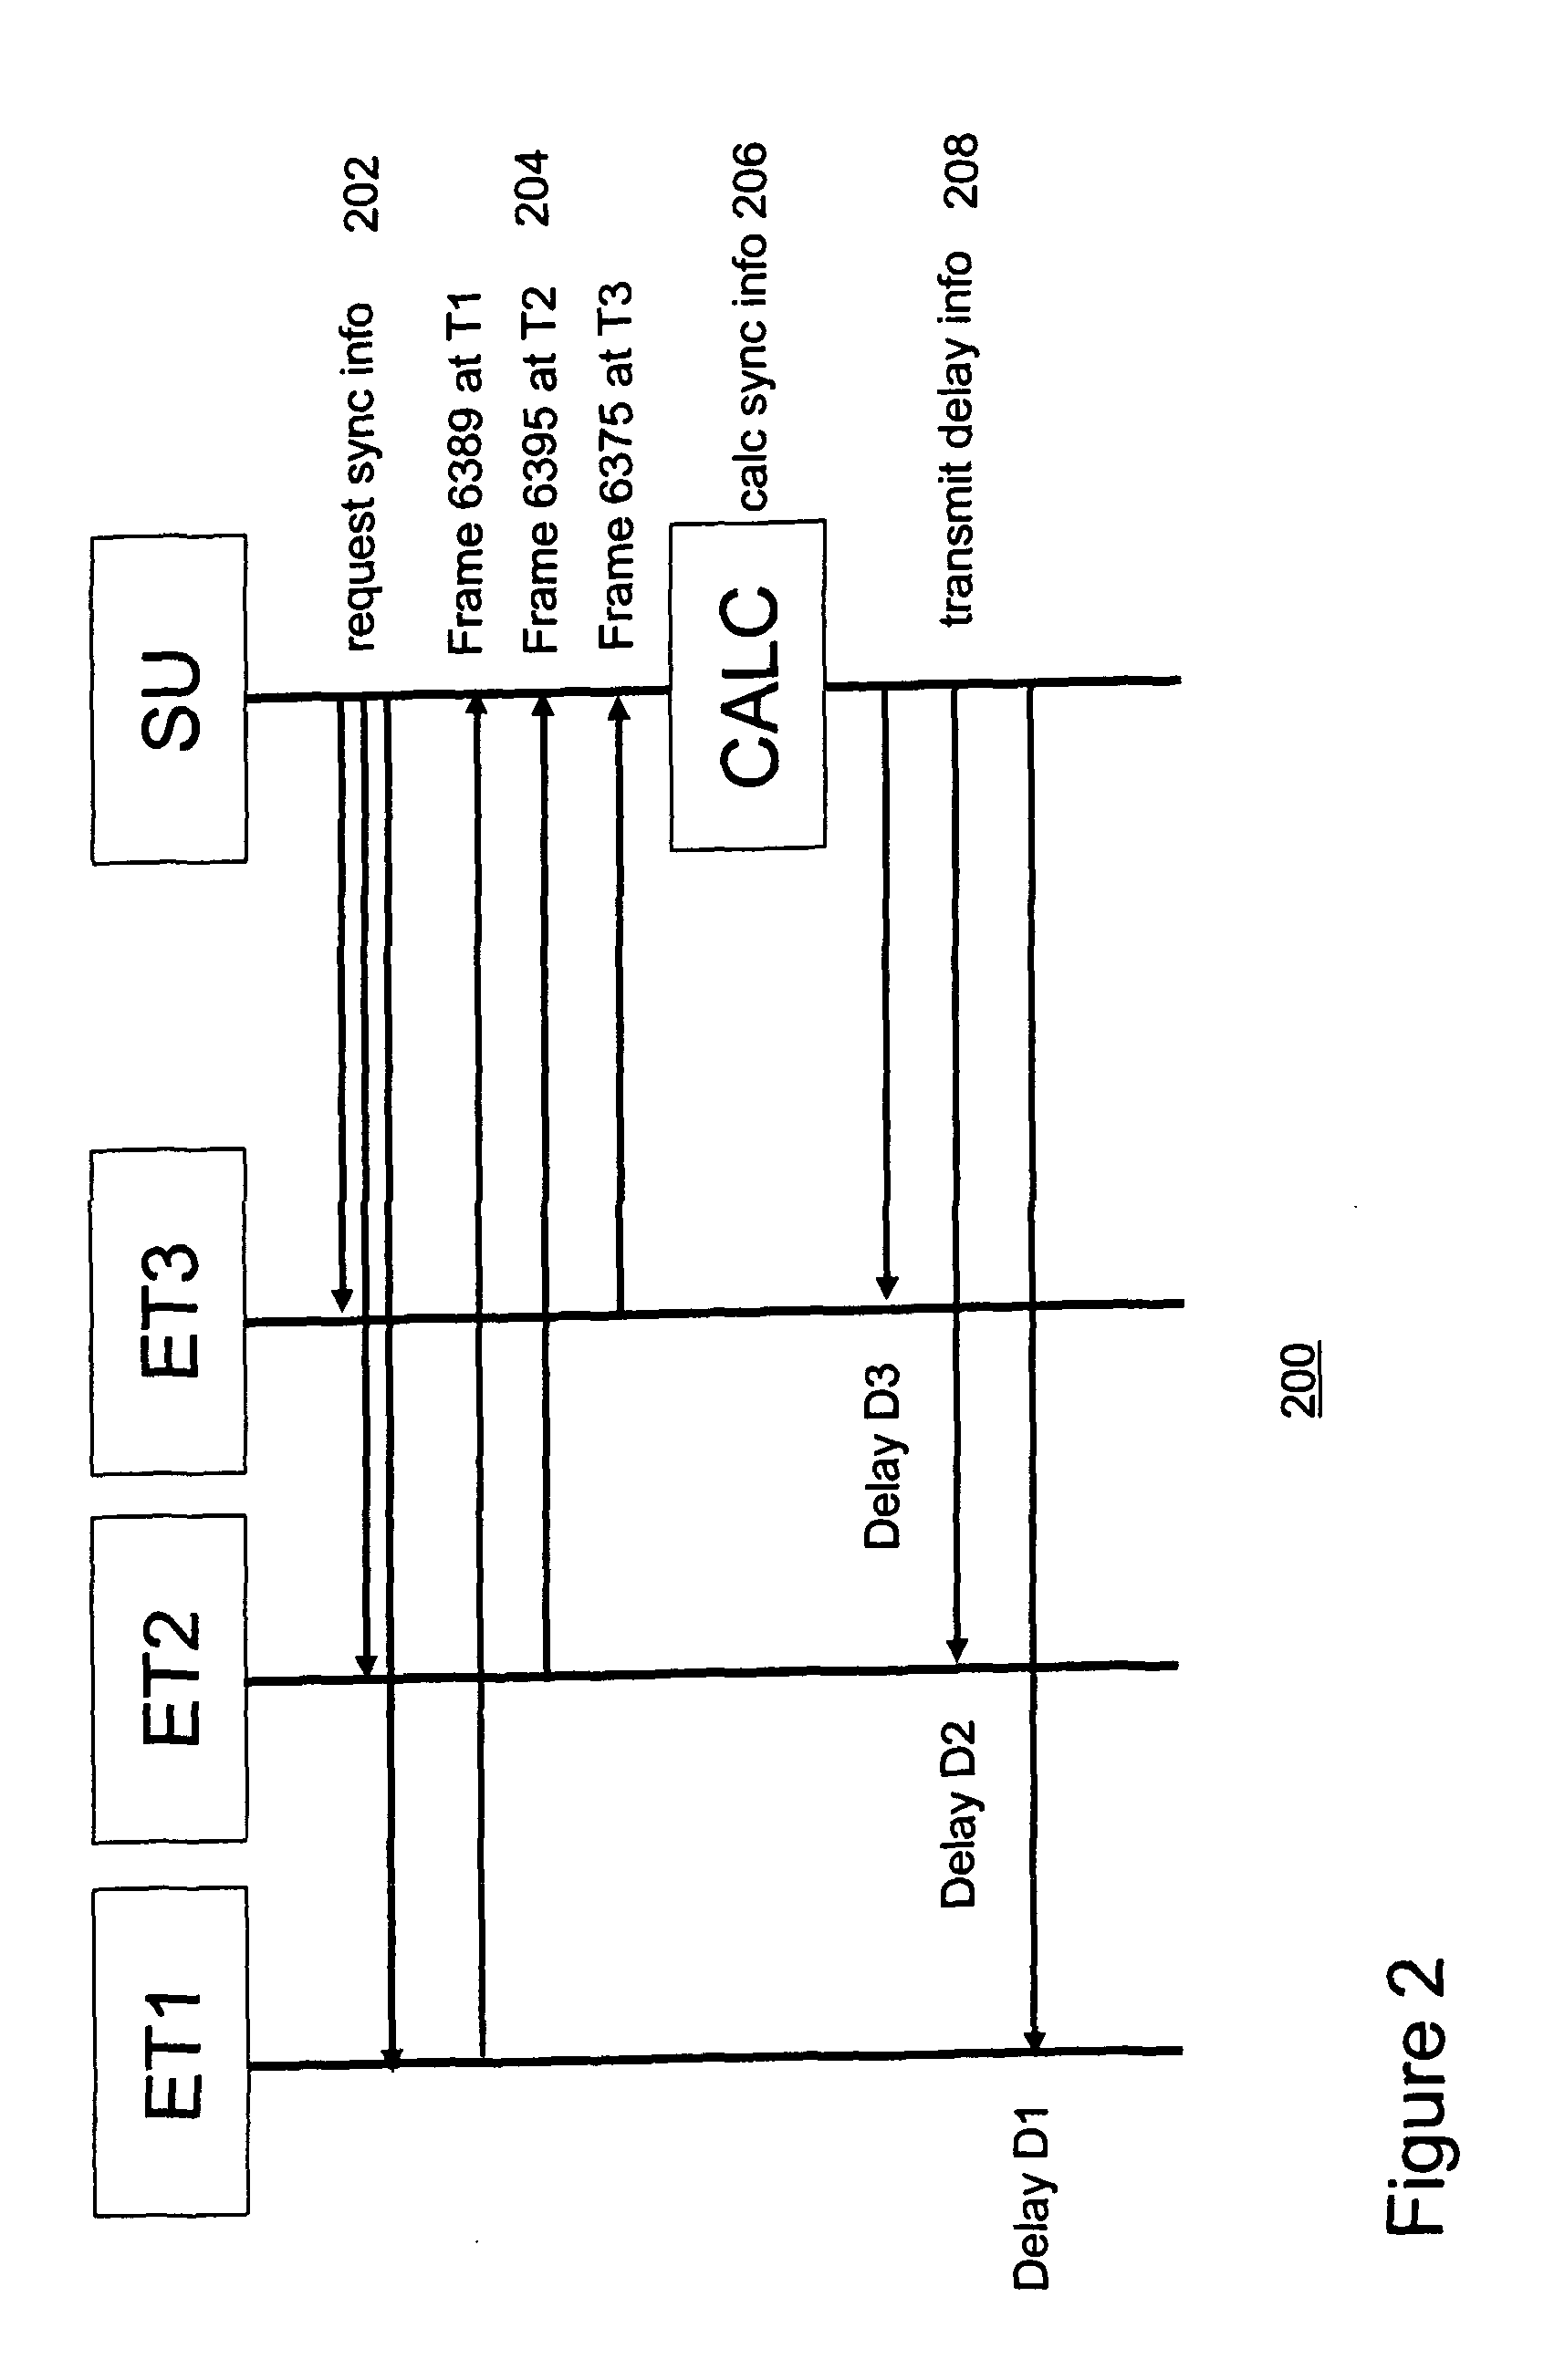 Method and System for Synchronizing the Output of Terminals